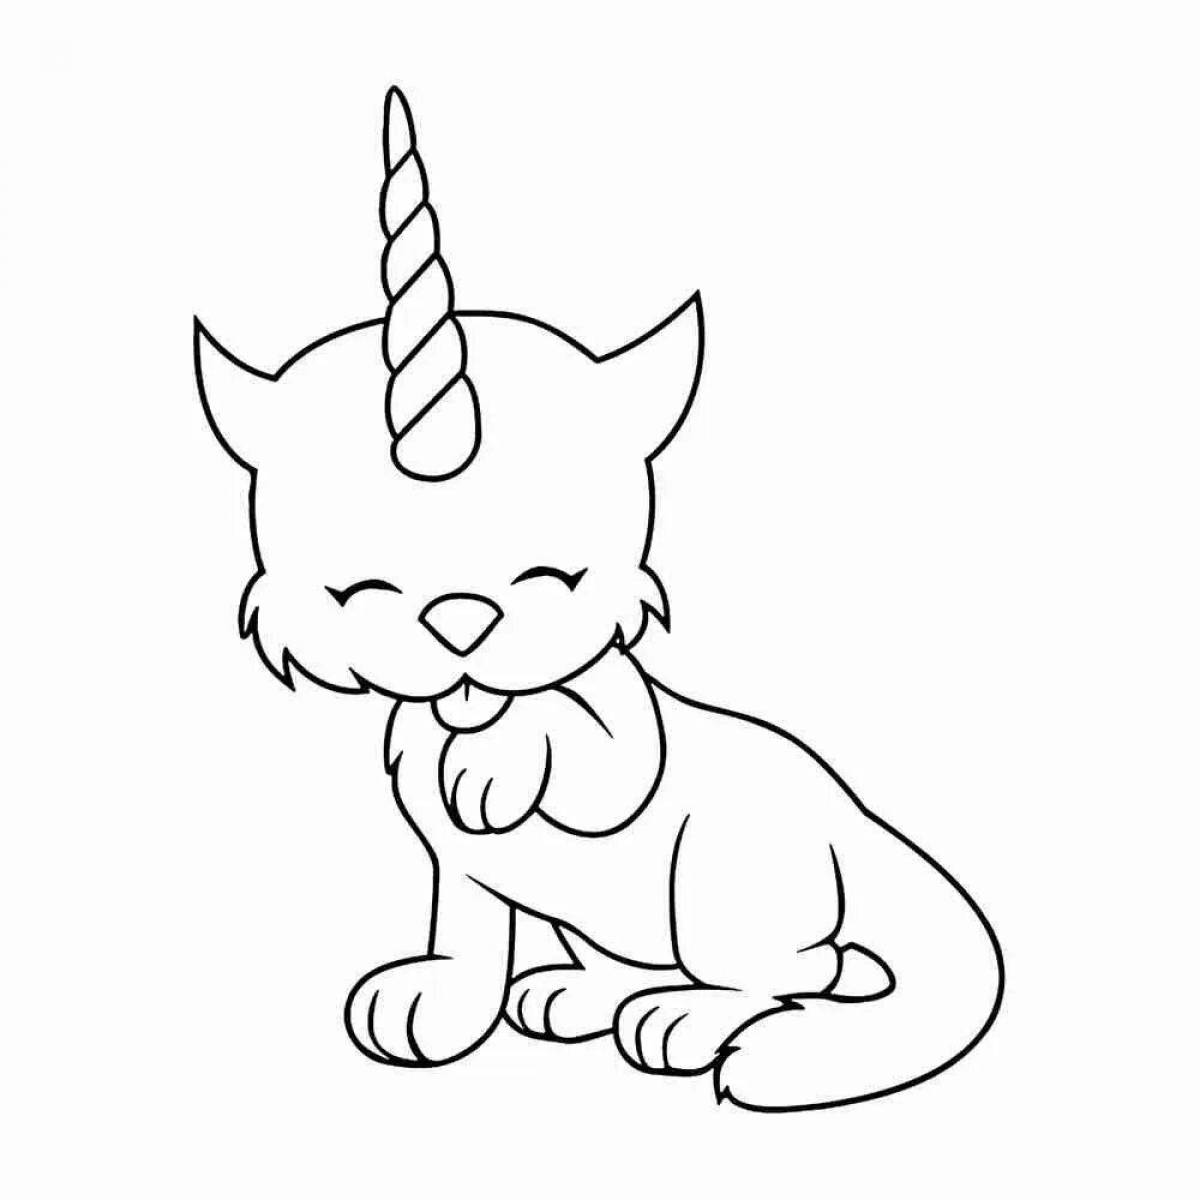 Coloring page affectionate cat